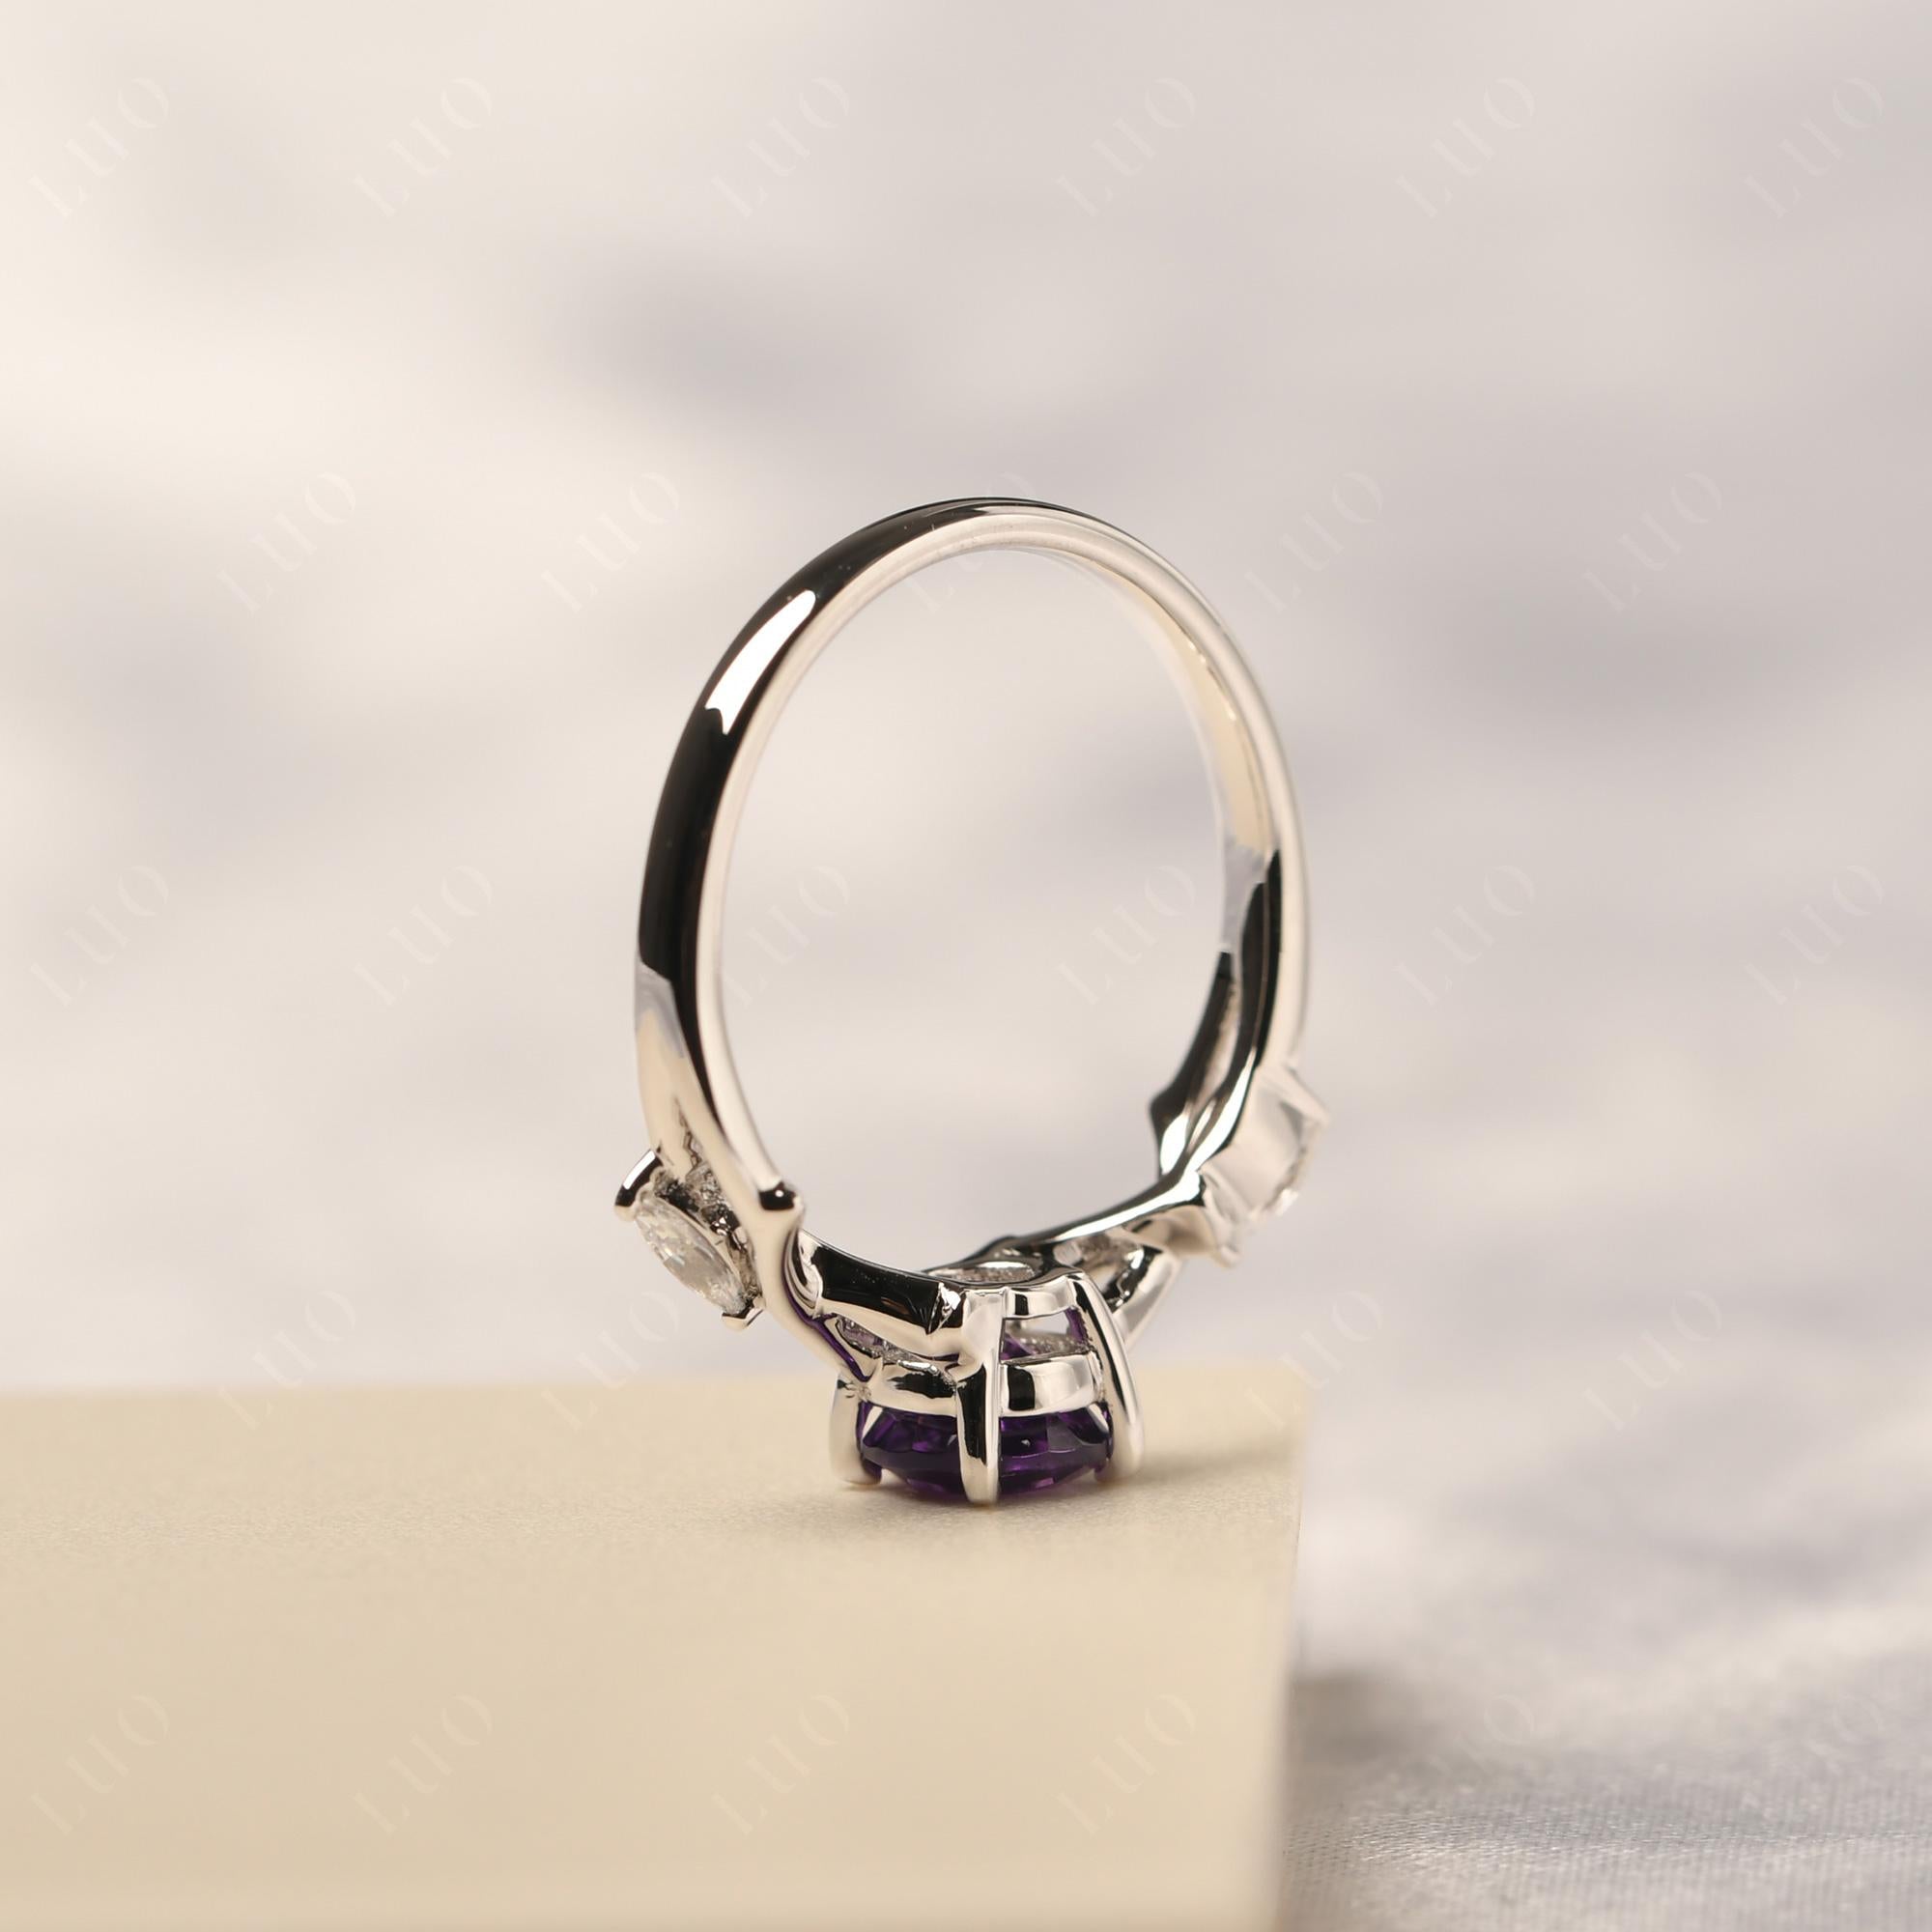 Twig Amethyst Engagement Ring - LUO Jewelry